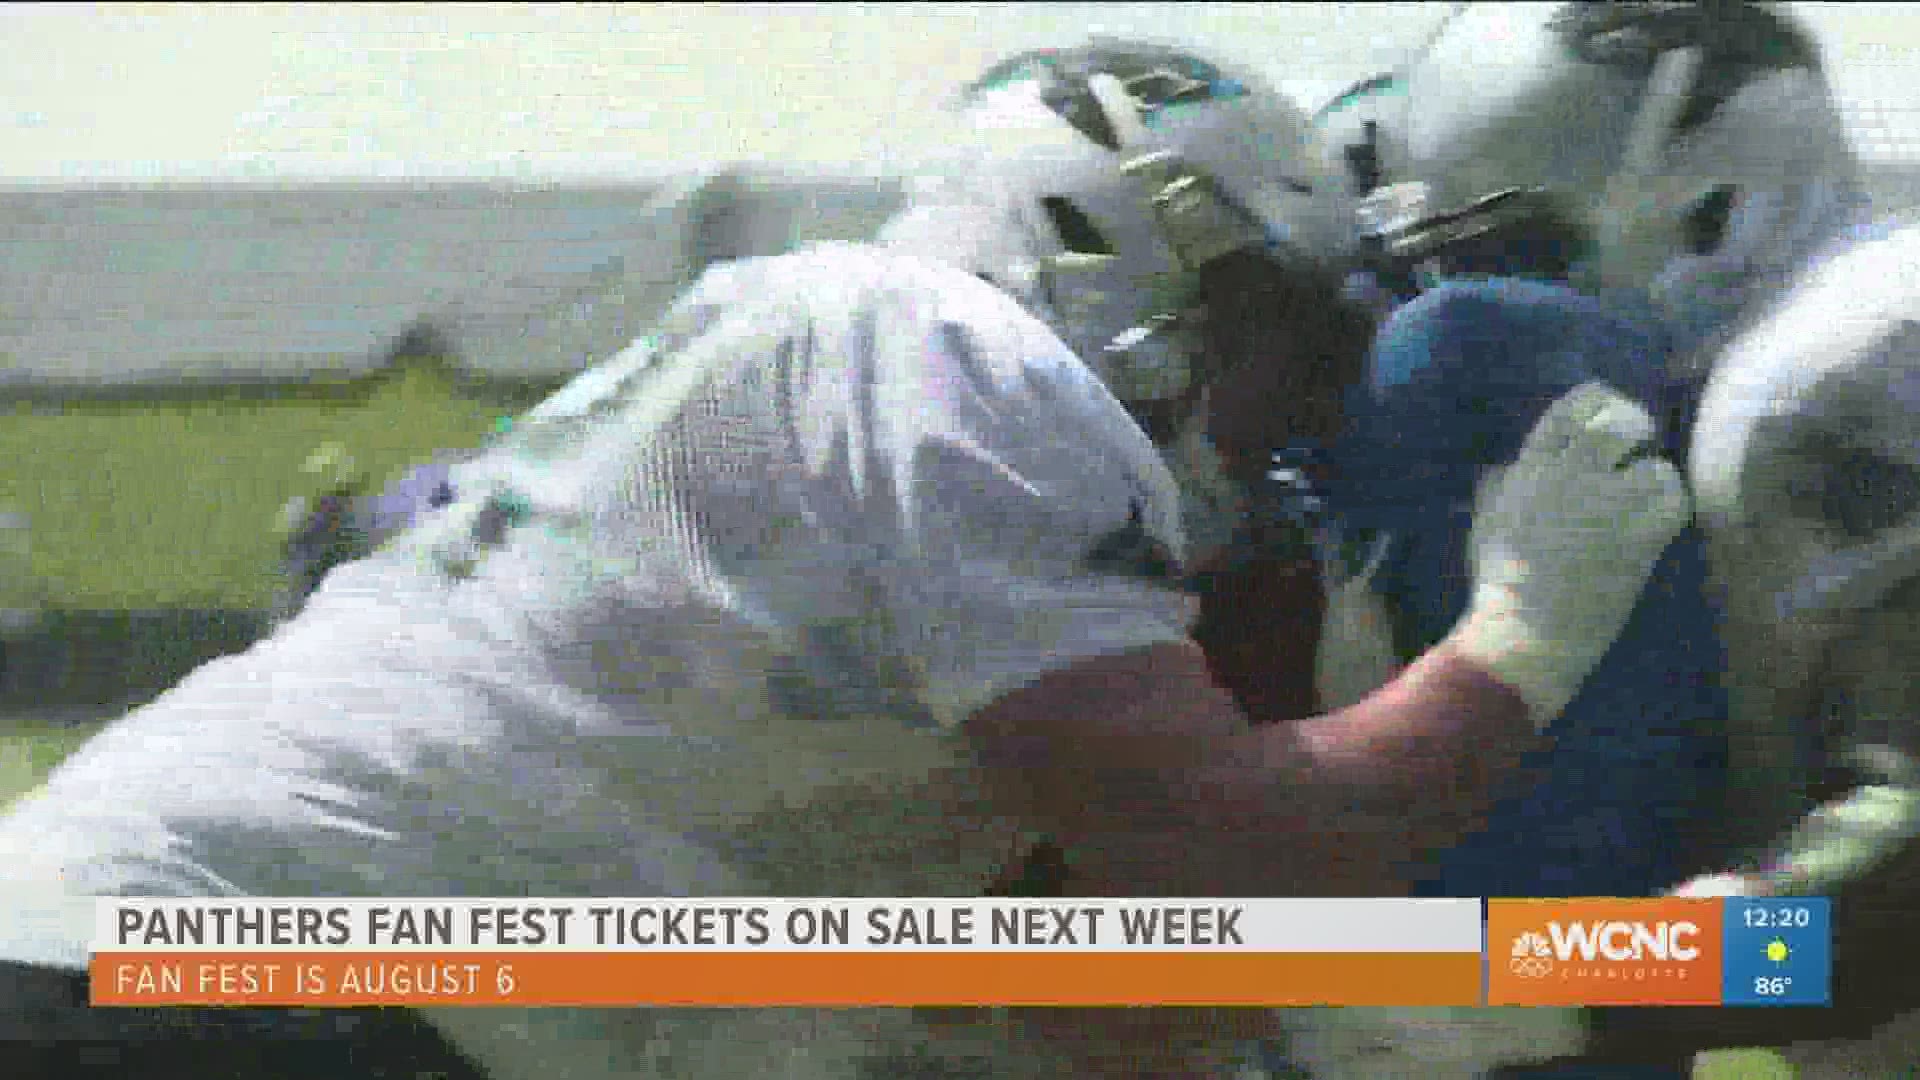 Fans can see The Panthers practice at Fan Fest on August 6th at Bank of America Stadium